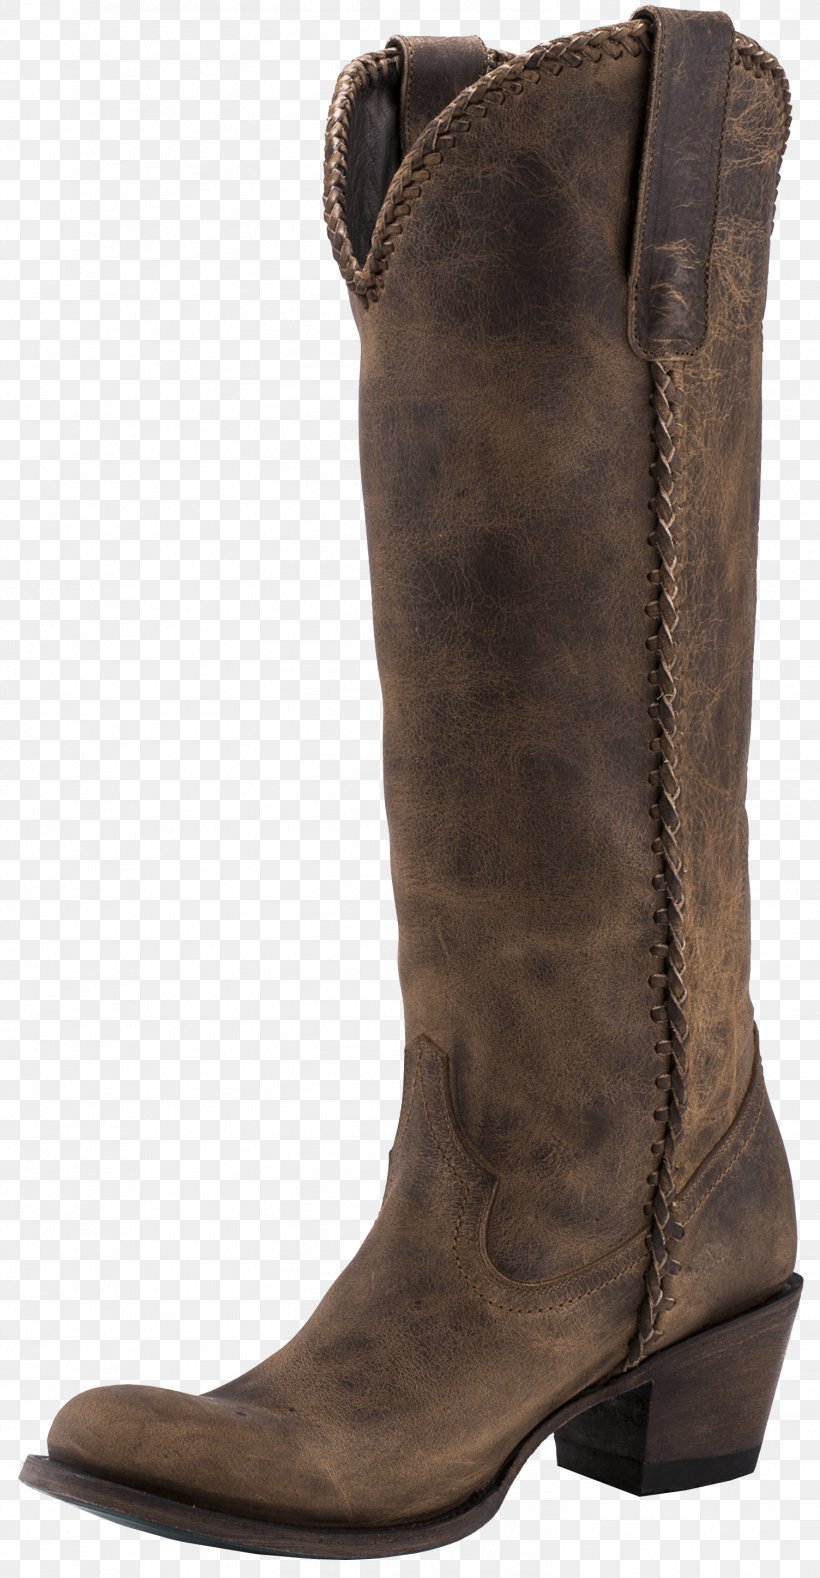 Cowboy Boot Riding Boot Footwear Shoe, PNG, 1504x2896px, Cowboy Boot, Boot, Brown, Cowboy, Equestrian Download Free